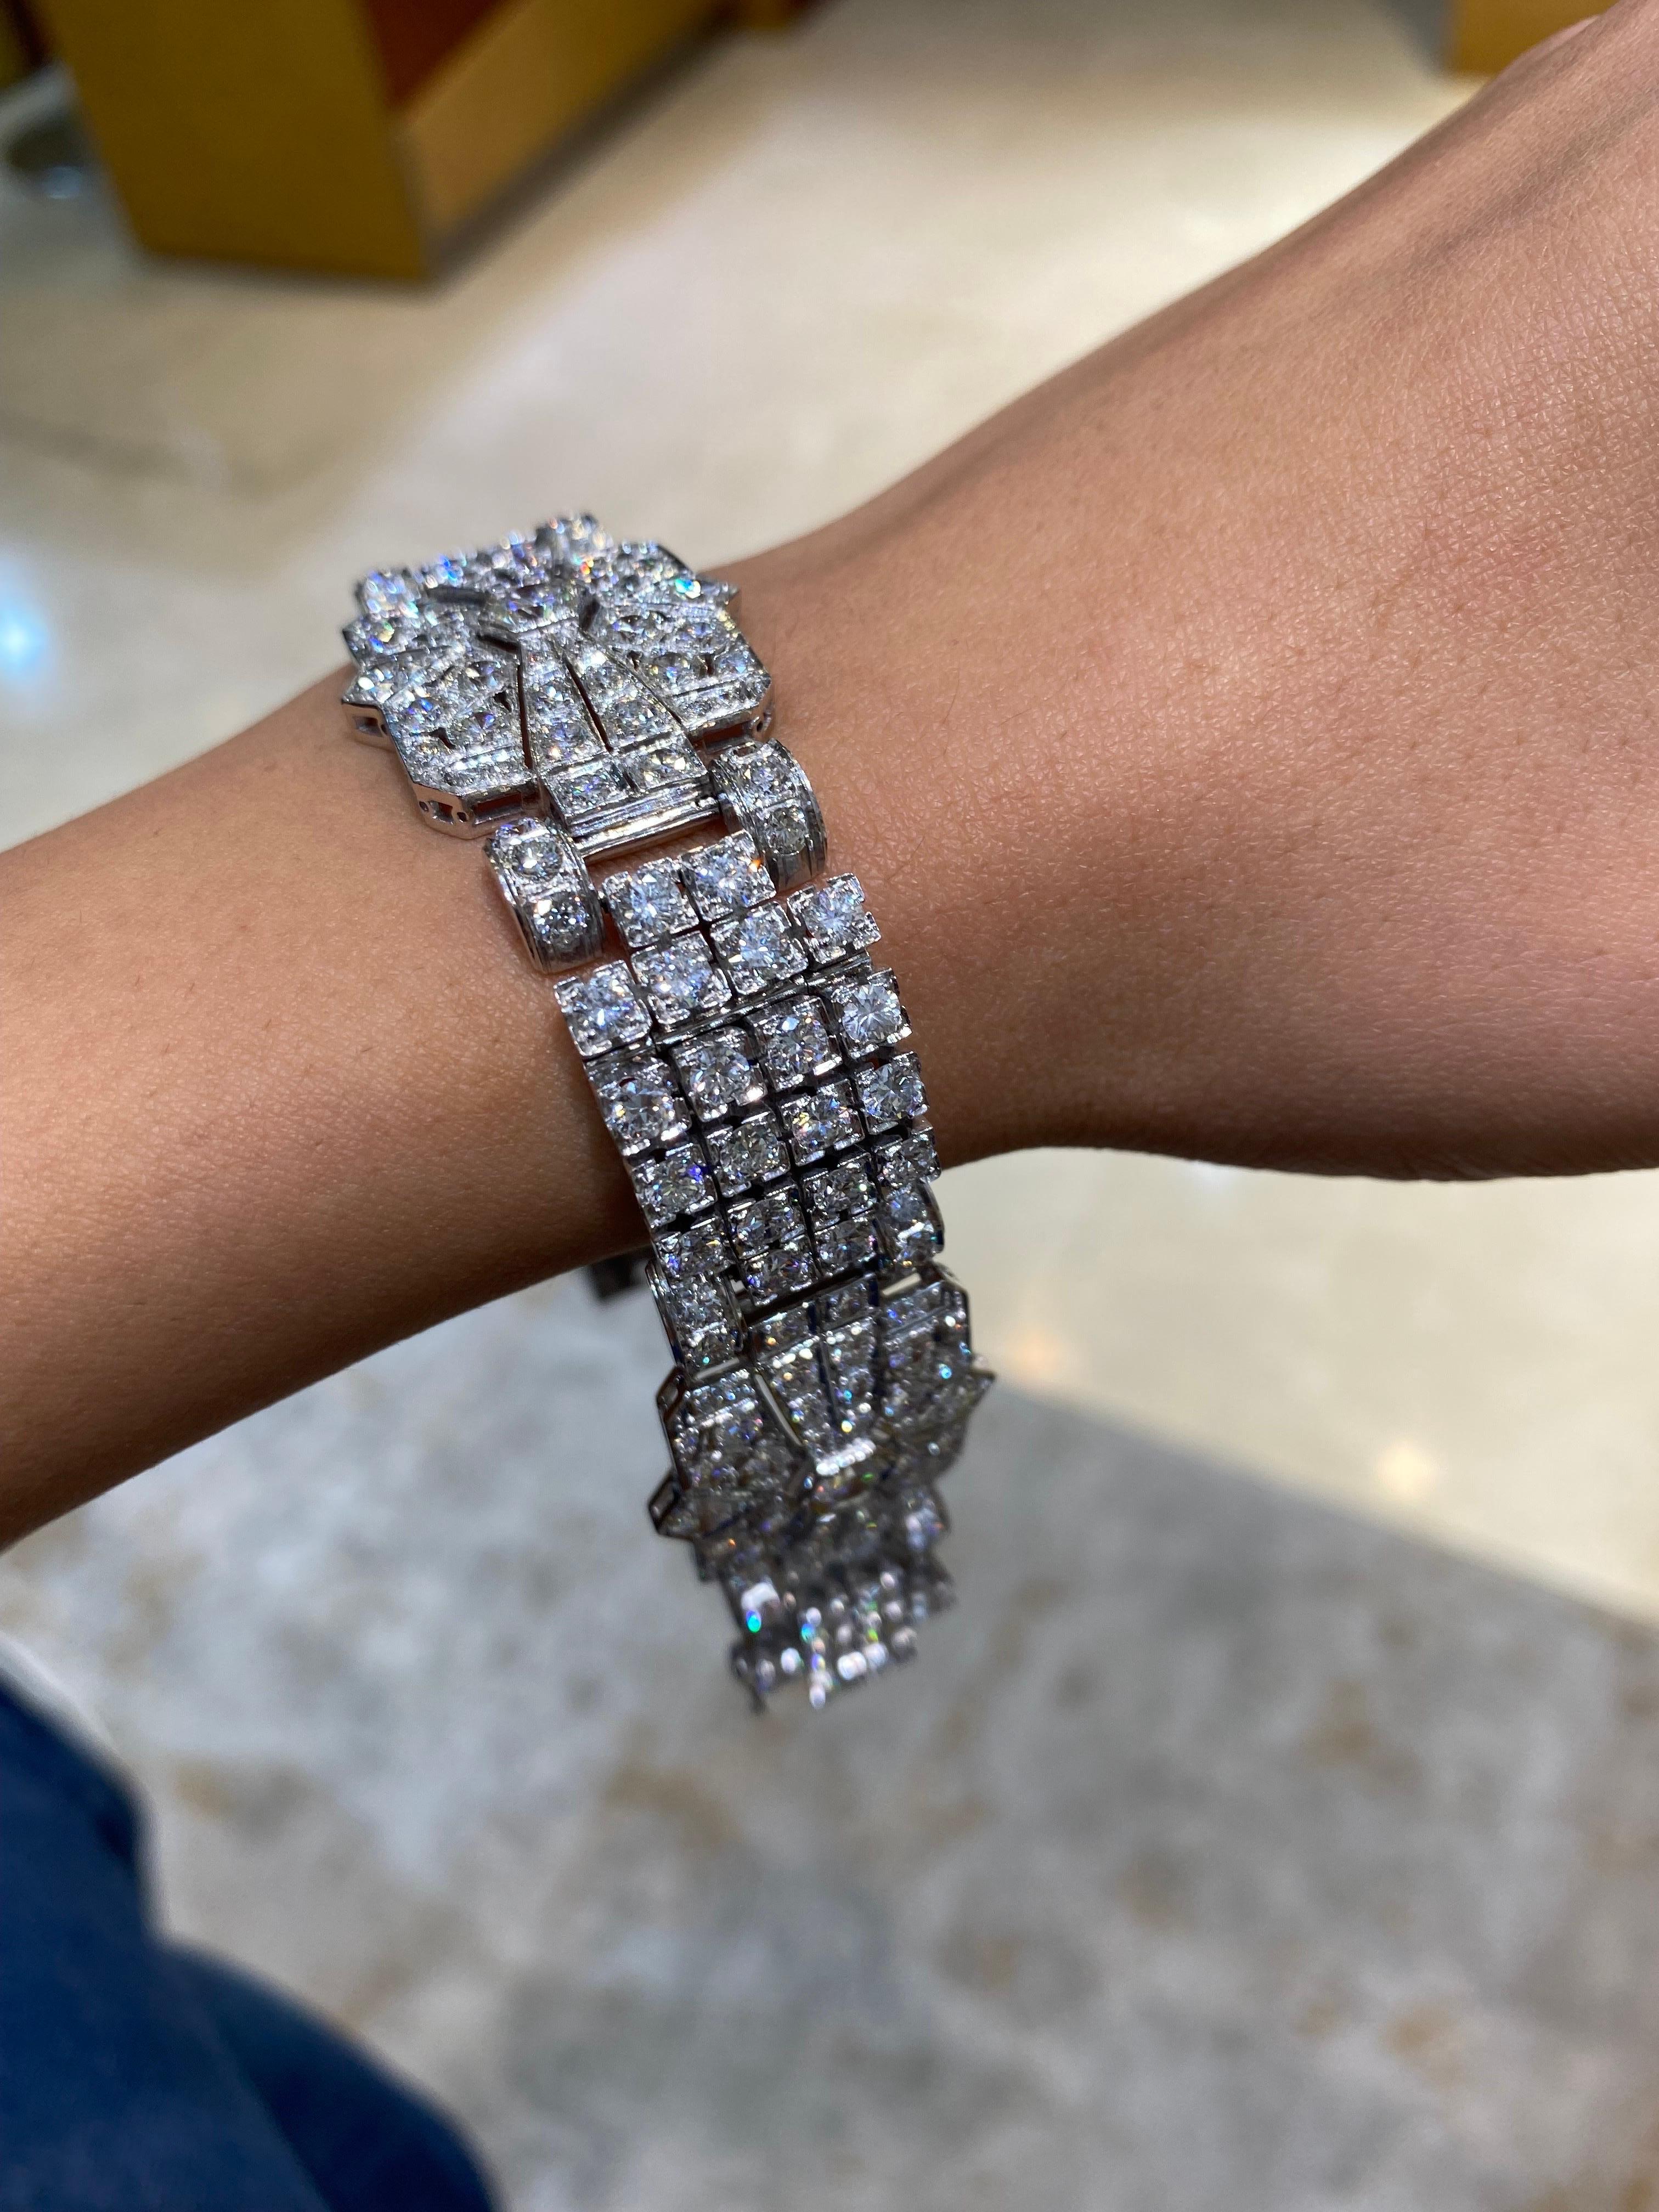 A beautiful art-deco style, antique, 26.88 carat Diamond bracelet set in solid 70 grams of Platinum. The bracelet is currently 7 inches long. 
Please feel free to message us for more information. 